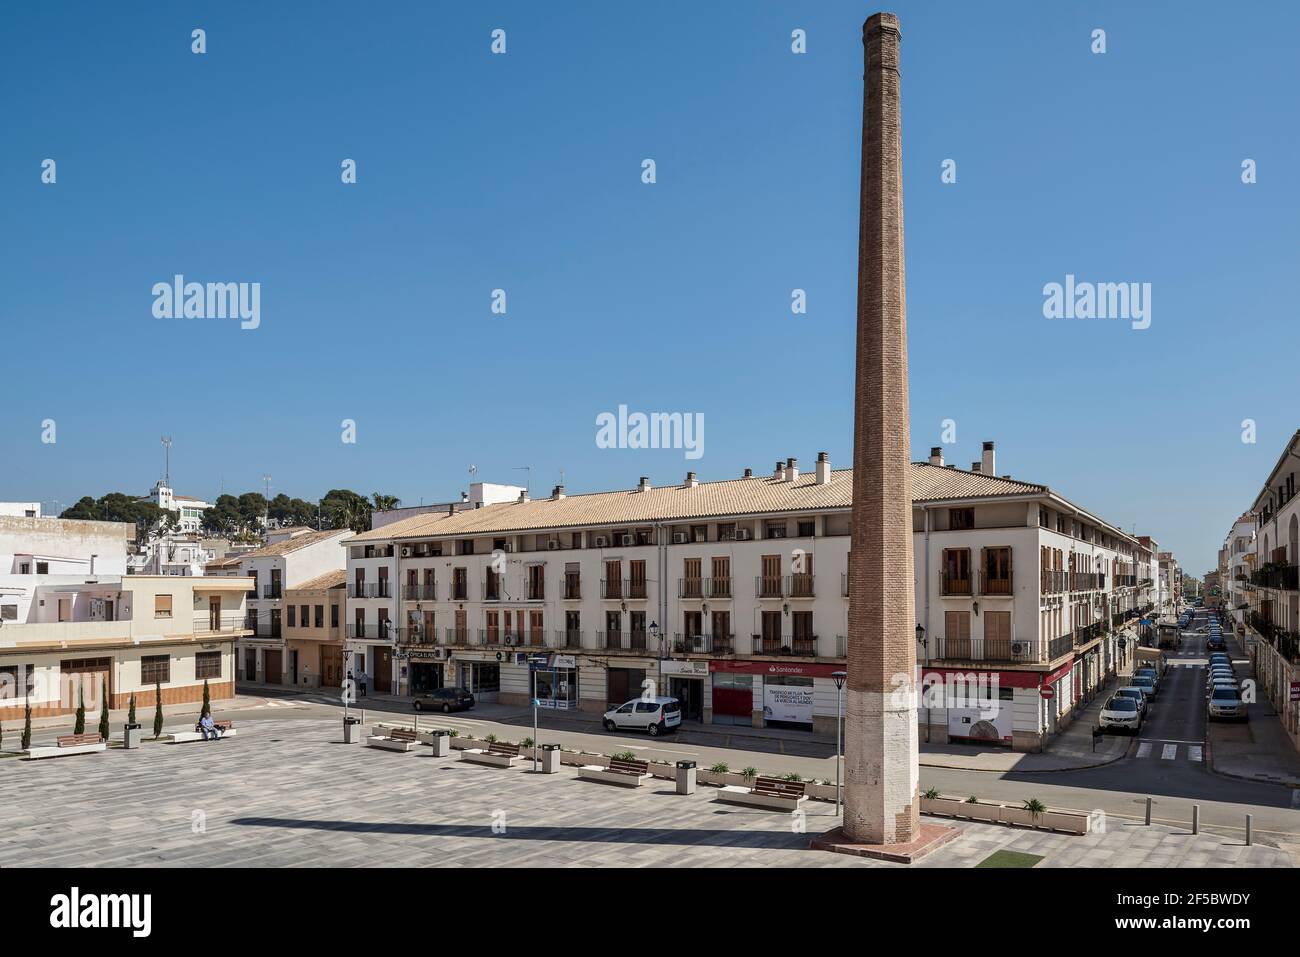 Chimney of the Conservera Chulvi, an emblematic factory from the early 20th century that closed in El Puig, Valencia, Spain, Europe Stock Photo